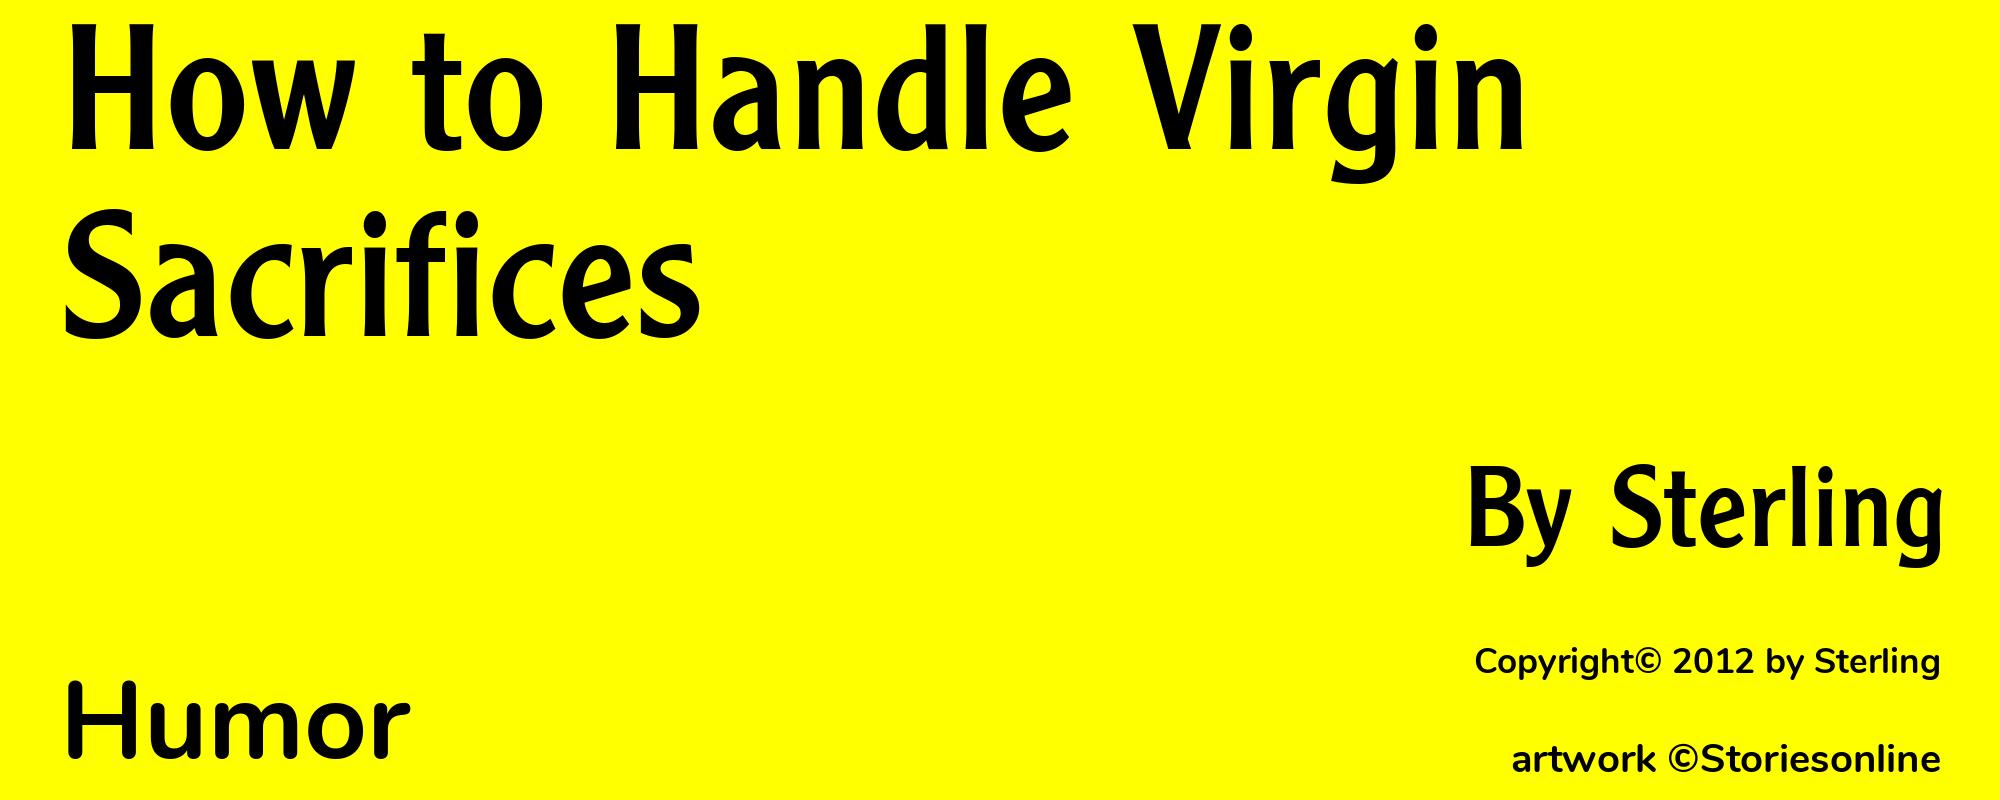 How to Handle Virgin Sacrifices - Cover